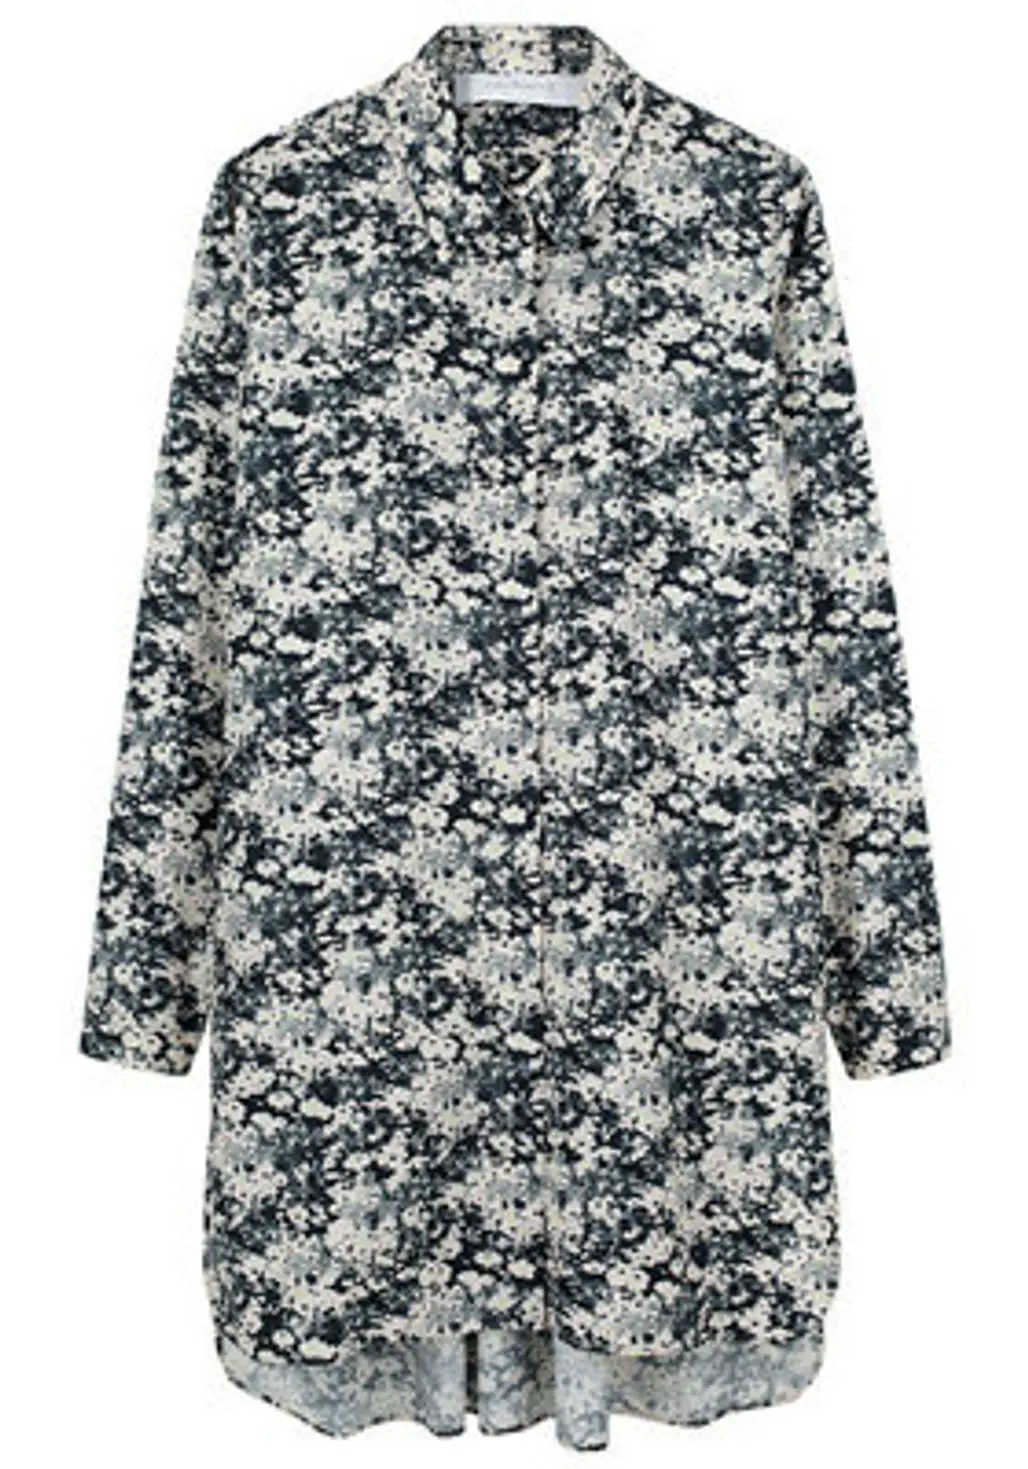 Cacharel Collared Printed Dress